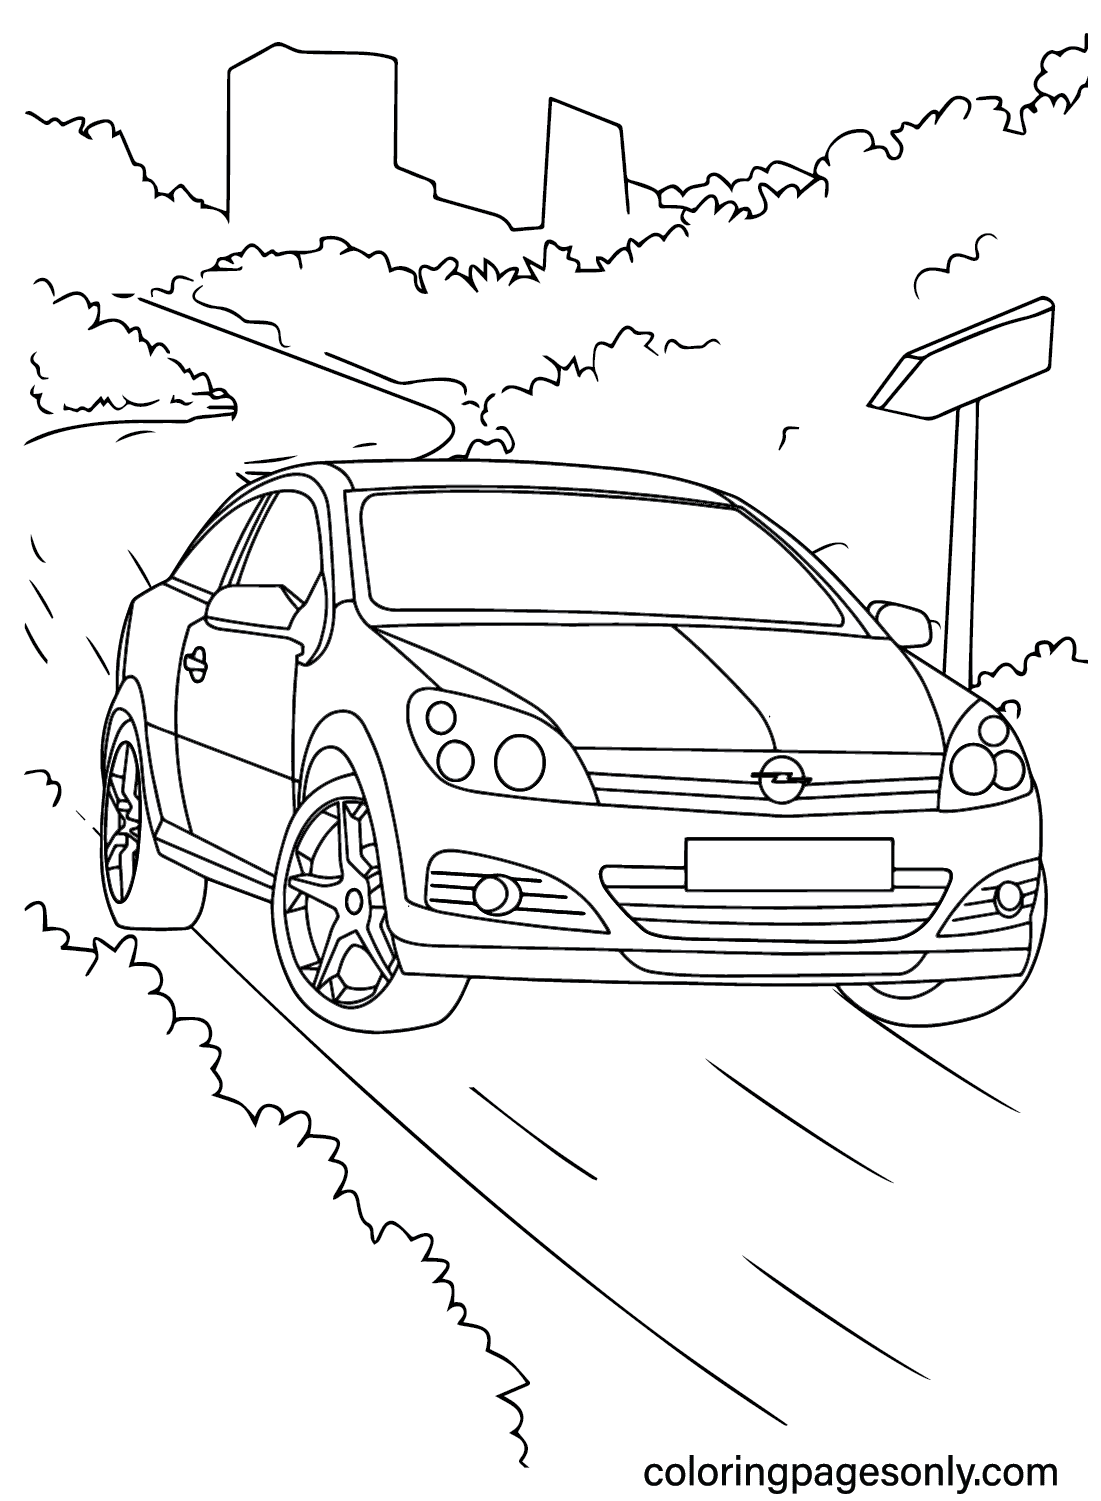 Opel Coloring Page to Print from Opel